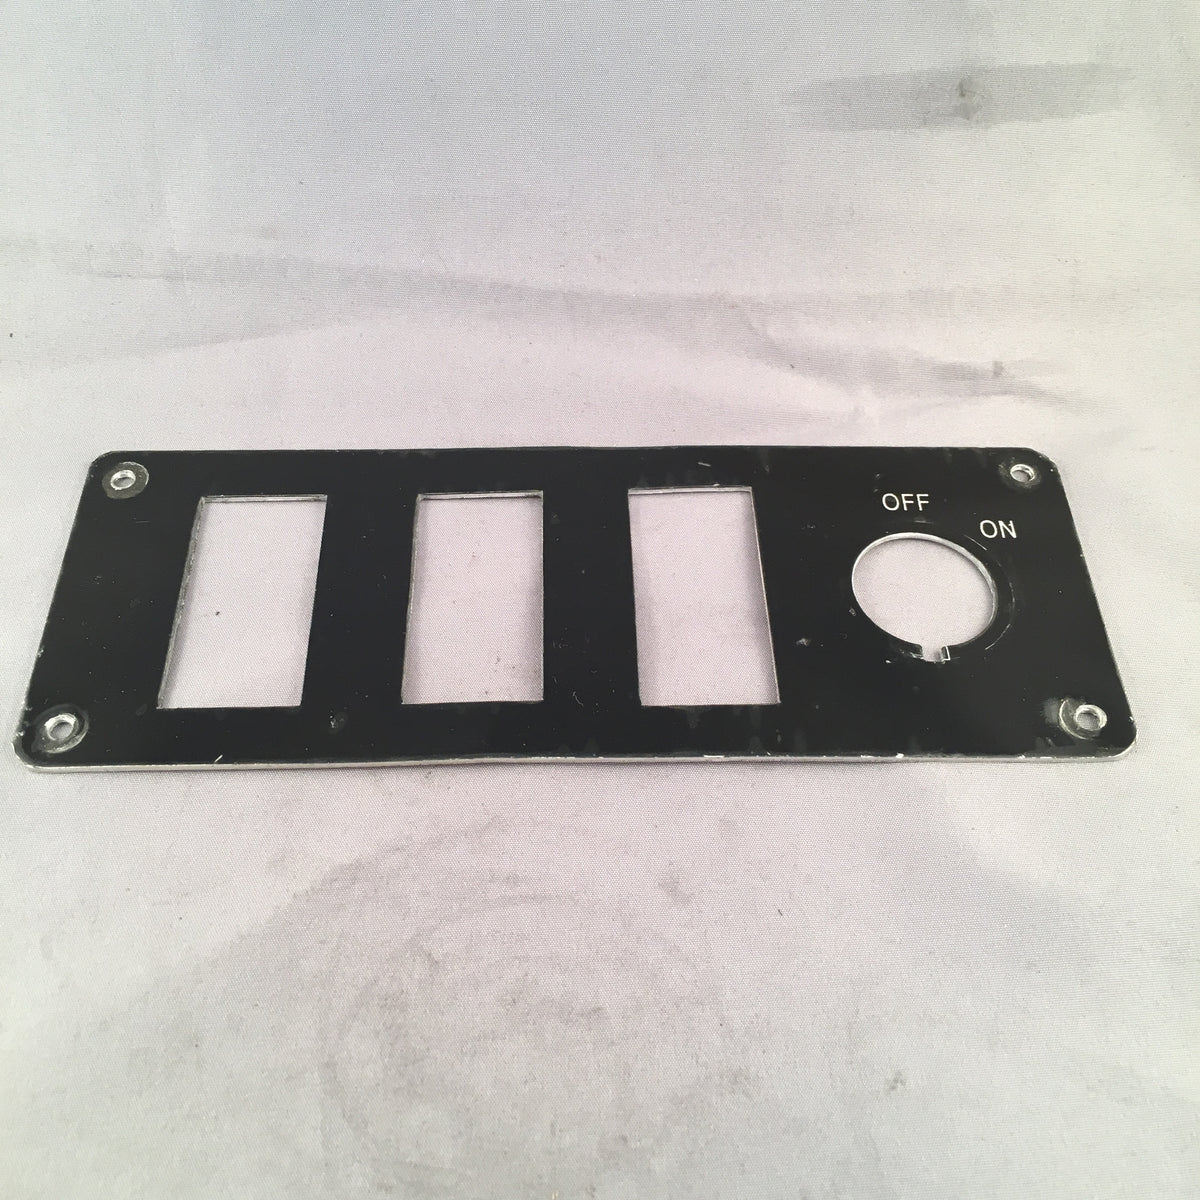 EMC INSTRUMENT PANEL WITH 3 SQUARE HOLES